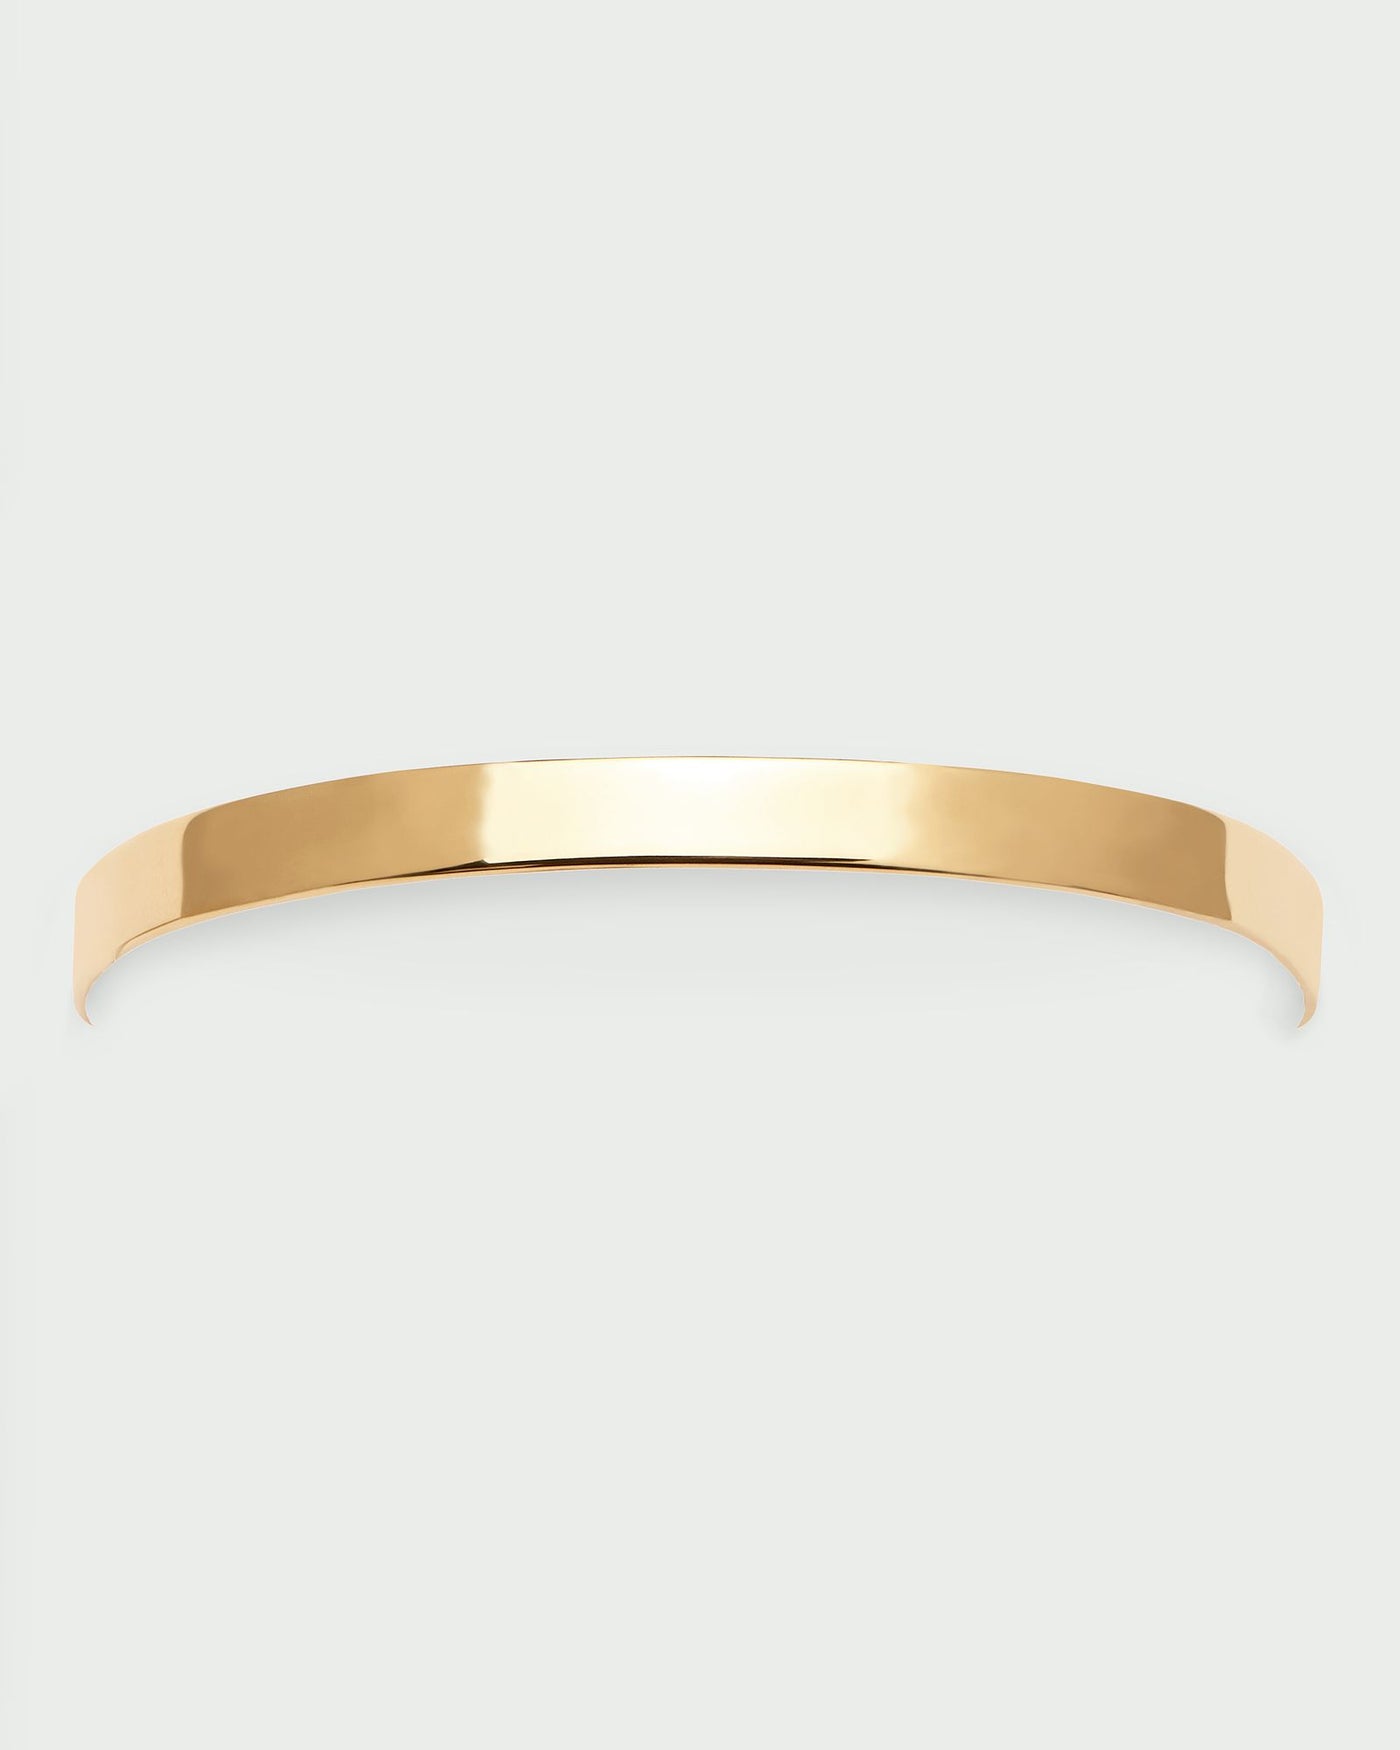 2024 Selection | Memora Bracelet. Gold-plated silver cuff bracelet to personalize with engraving. Get the latest arrival from PDPAOLA. Place your order safely and get this Best Seller. Free Shipping.